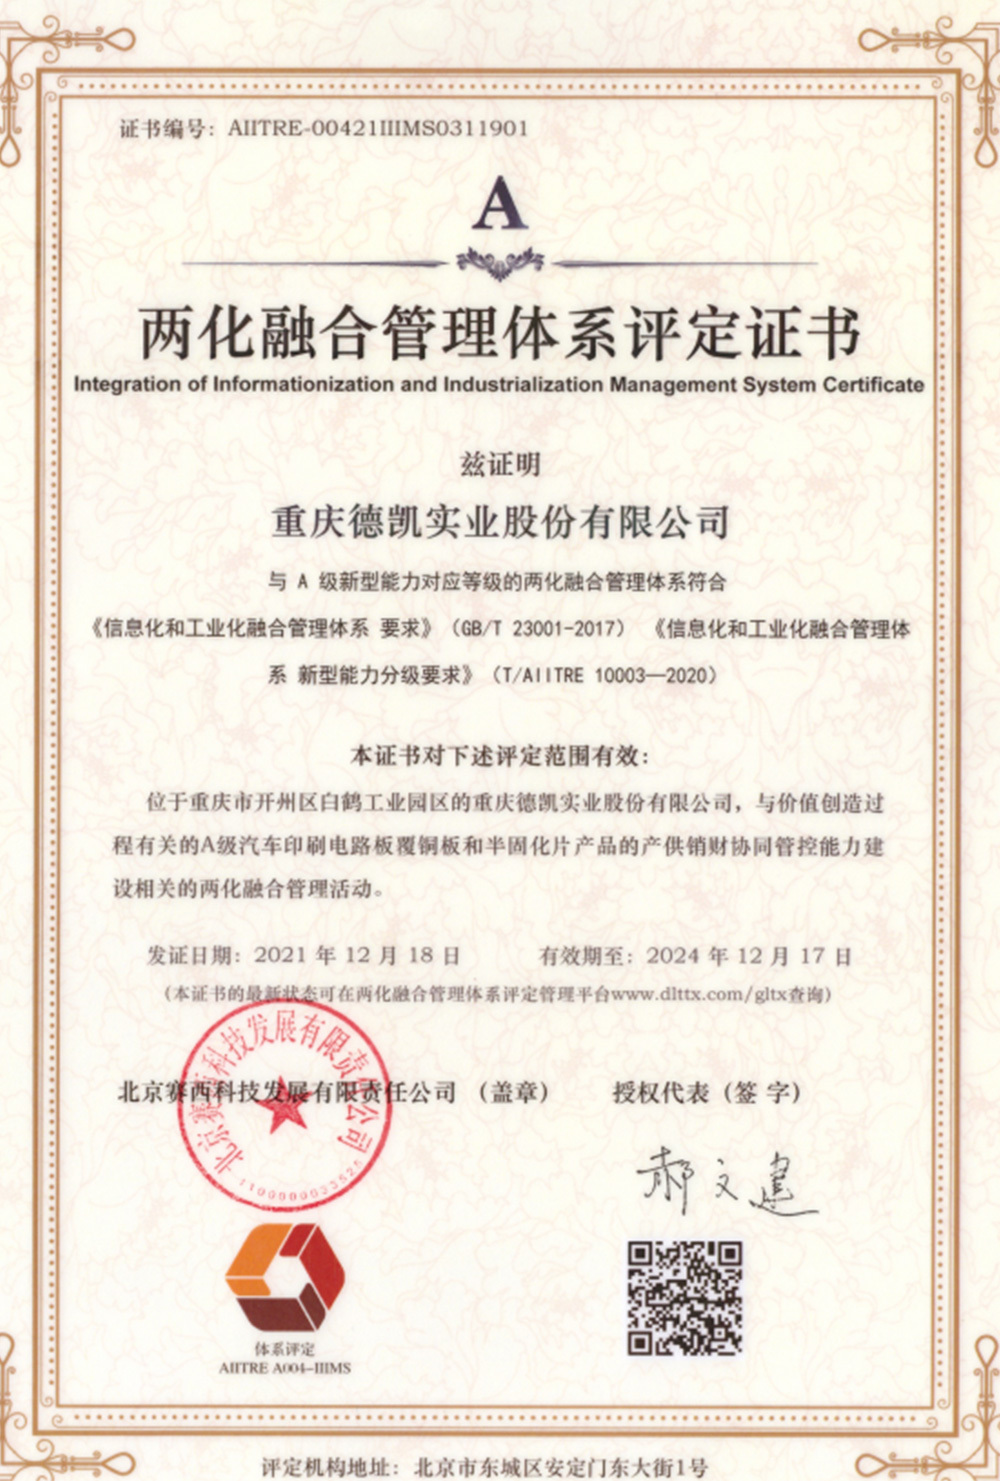 Two integration management system certificate